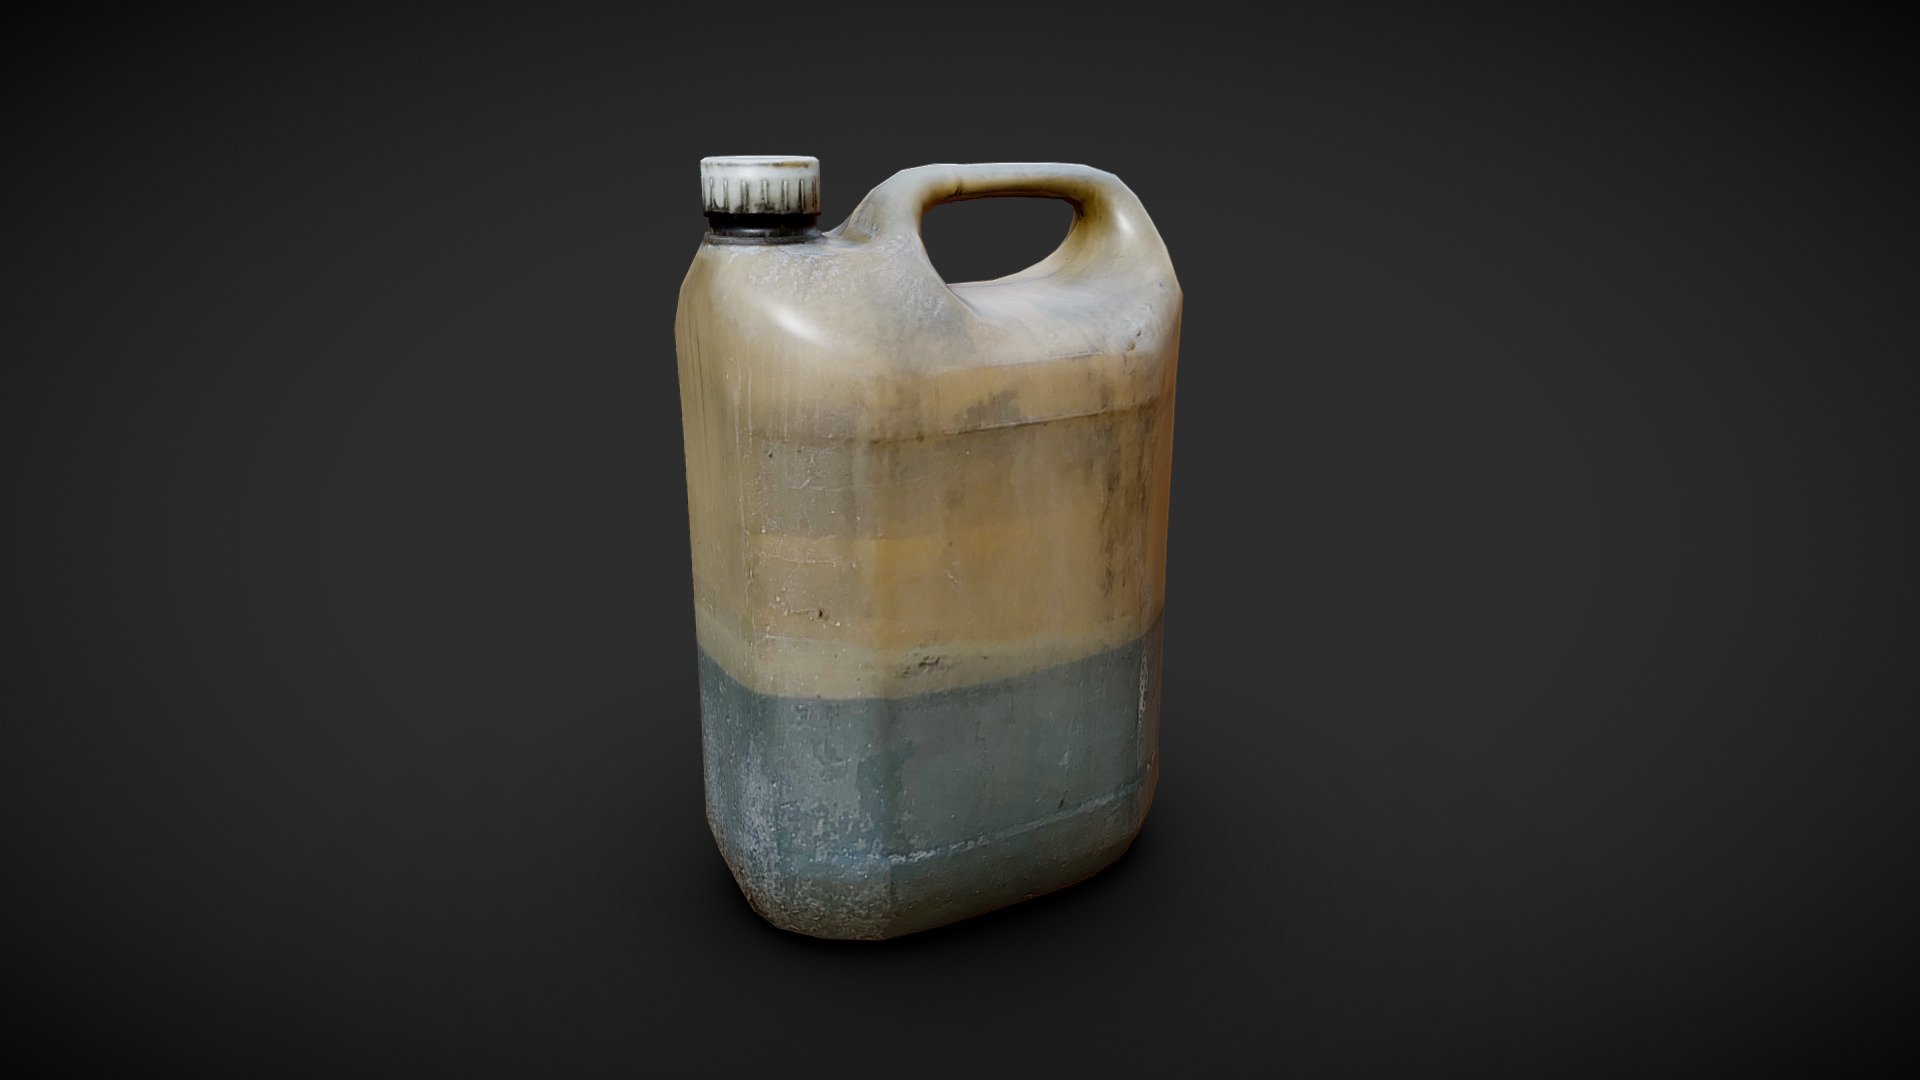 Lowpoly remake of Motor Oil bottle gallon by Mex Guillen.

https://sketchfab.com/3d-models/motor-oil-bottle-gallon-6da99cd84bae4083ba703abfec7aaf6b

420k to 2k triangles.

1x 1024 texture ( diffuse only).




Update 13/03/2023 :
Minor UV &amp; texture fix.
 - [REMAKE] - Motor Oil bottle gallon - Download Free 3D model by RaynaudL (@fts_ltx) 3d model